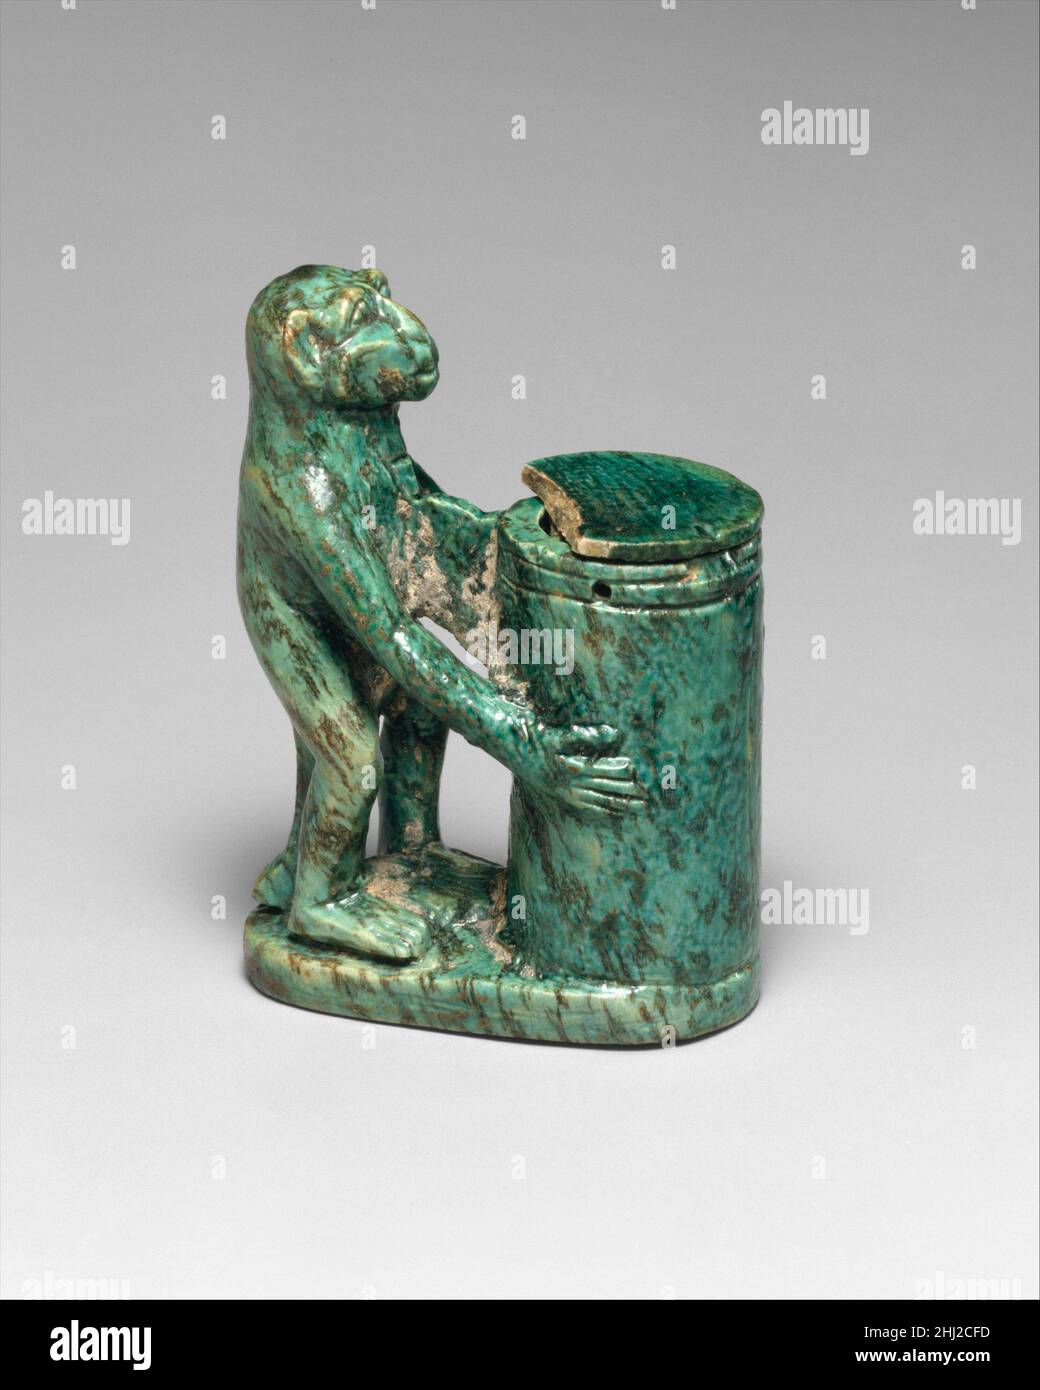 Kohl Tube in the Shape of a Monkey Holding a Vessel ca. 1550–1450 B.C. New Kingdom The Egyptians' use of eye cosmetics to enhance beauty and for prophylactic purposes is well documented both in artistic representations and by the cosmetic vessels that have been preserved from the earliest times. The most common substance utilized in the New Kingdom was kohl, a dark gray powder made from galena. Kohl was frequently stored in decorated tubes with long, slim sticks made of polished wood or stone as applicators. As in earlier periods, representations of monkeys often decorated cosmetic vessels in Stock Photo